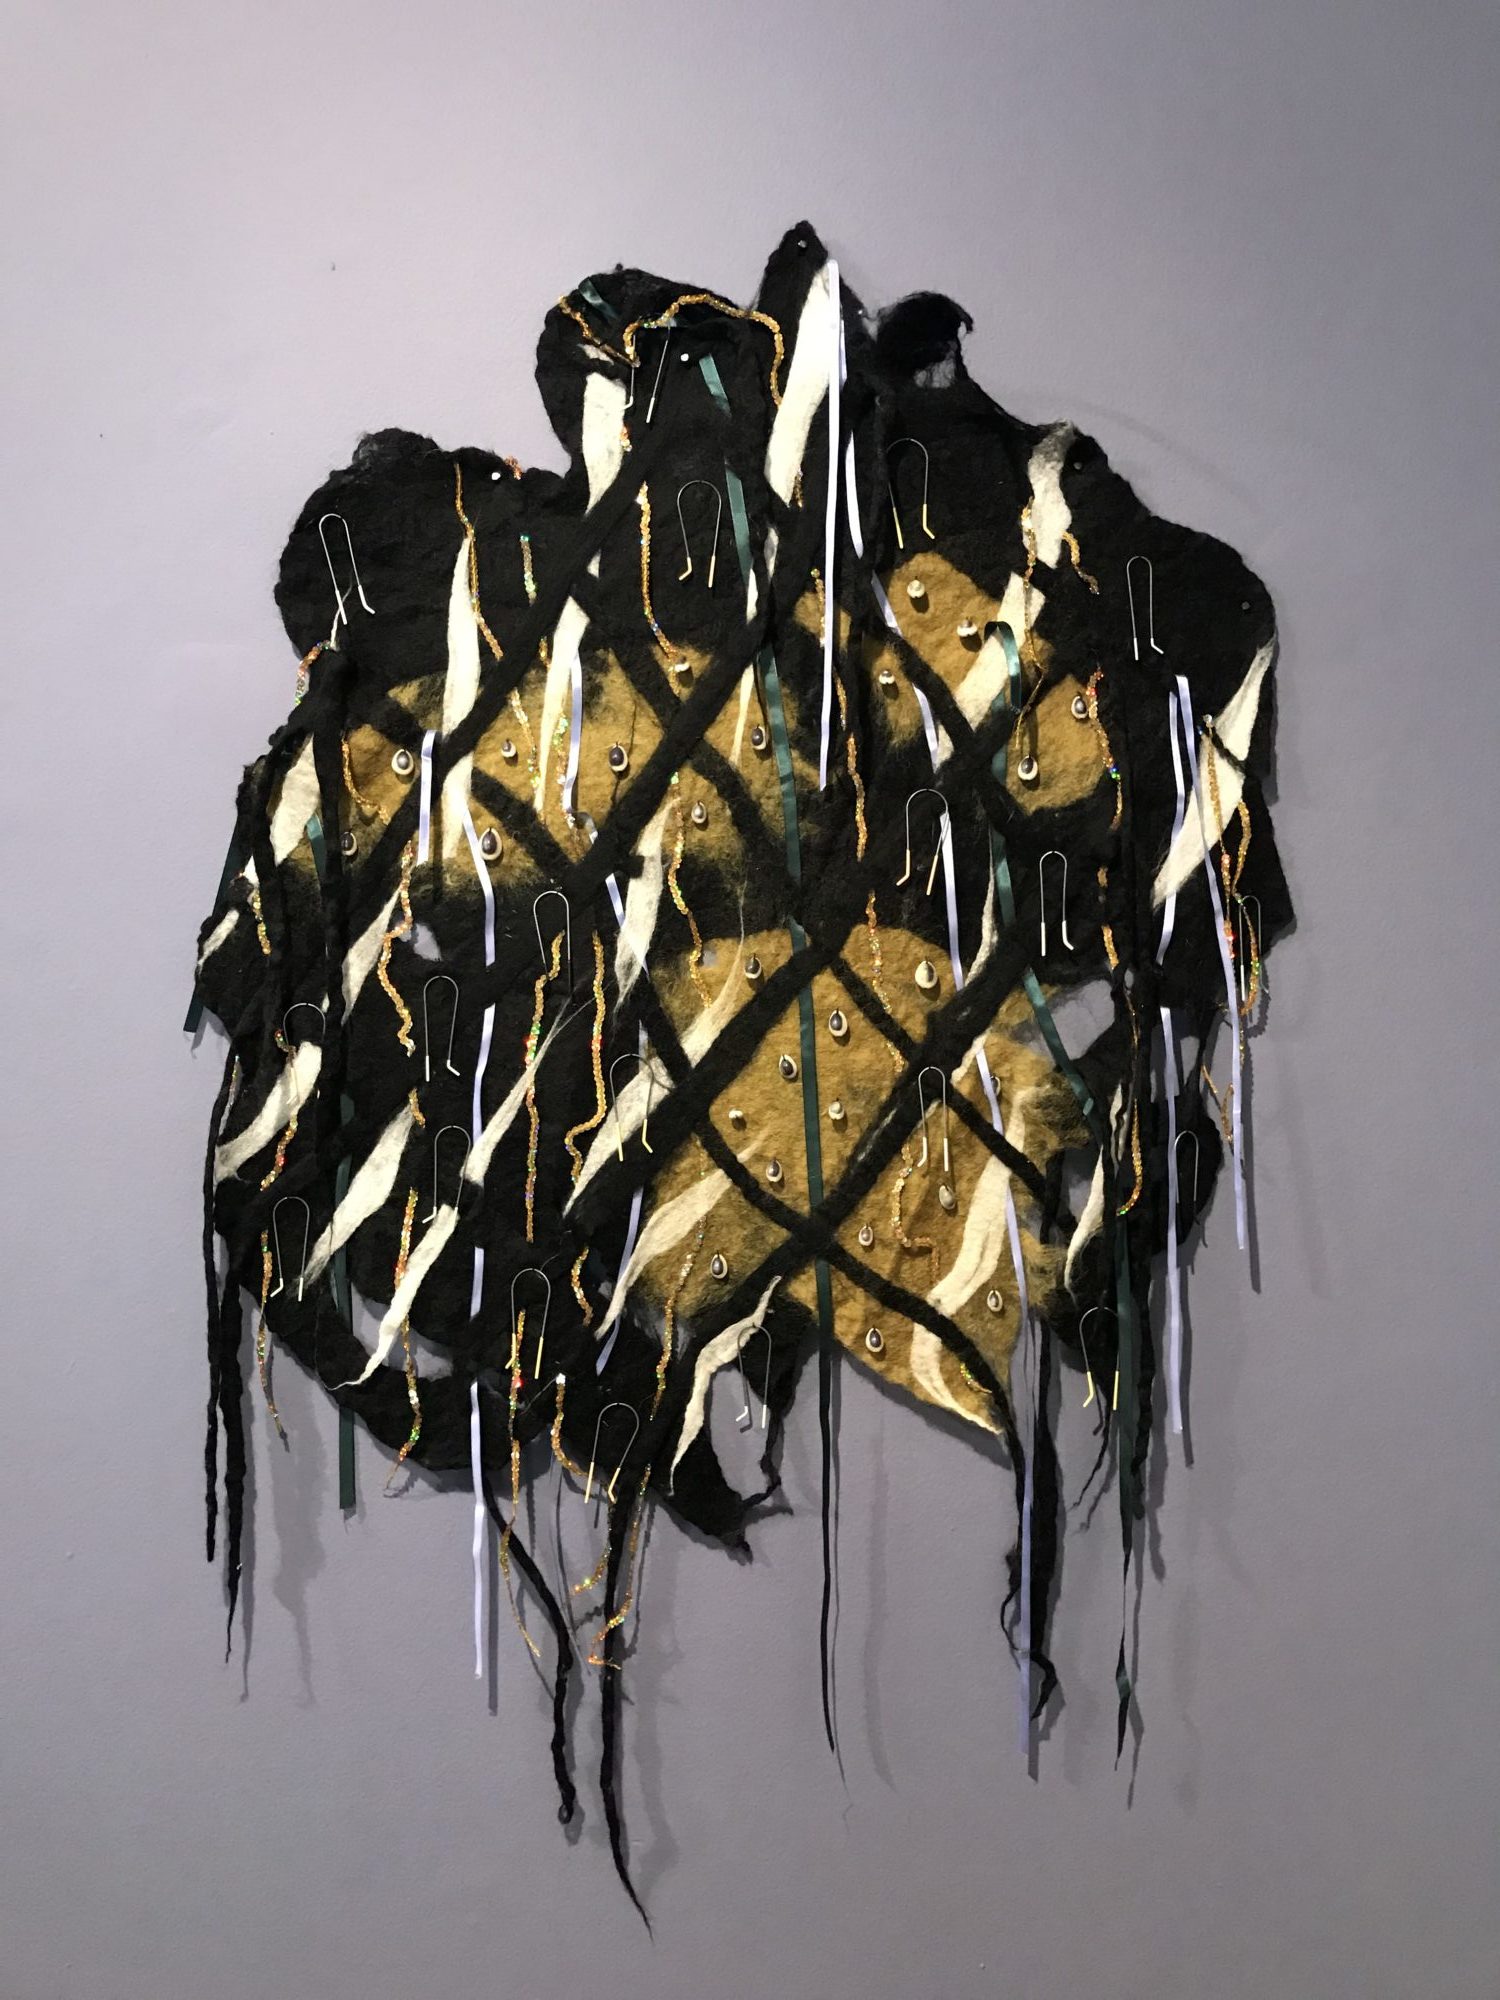 organic looking gold and black wall sculpture with hair pins and tassels hanging down against a gray wall